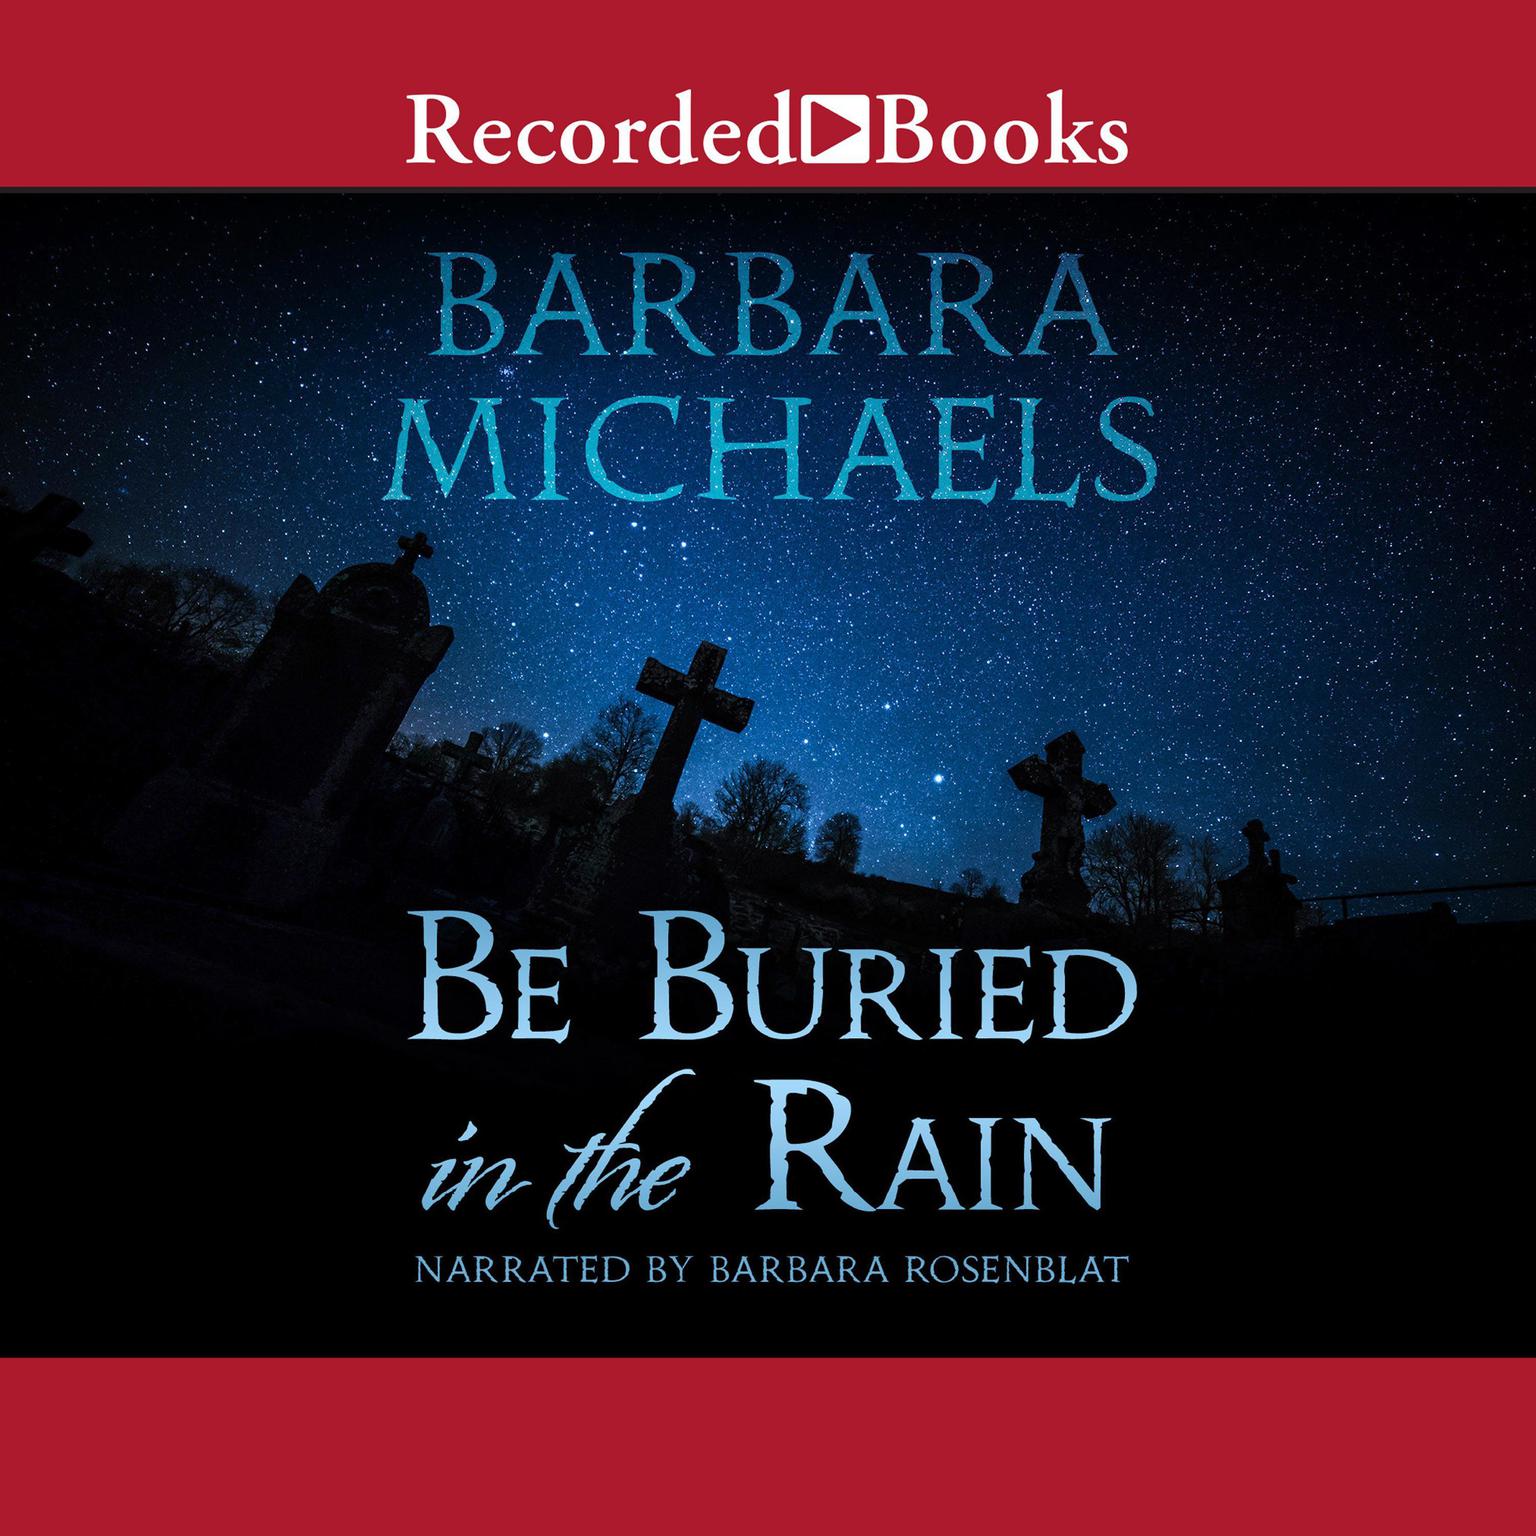 Be Buried in the Rain Audiobook, by Barbara Michaels